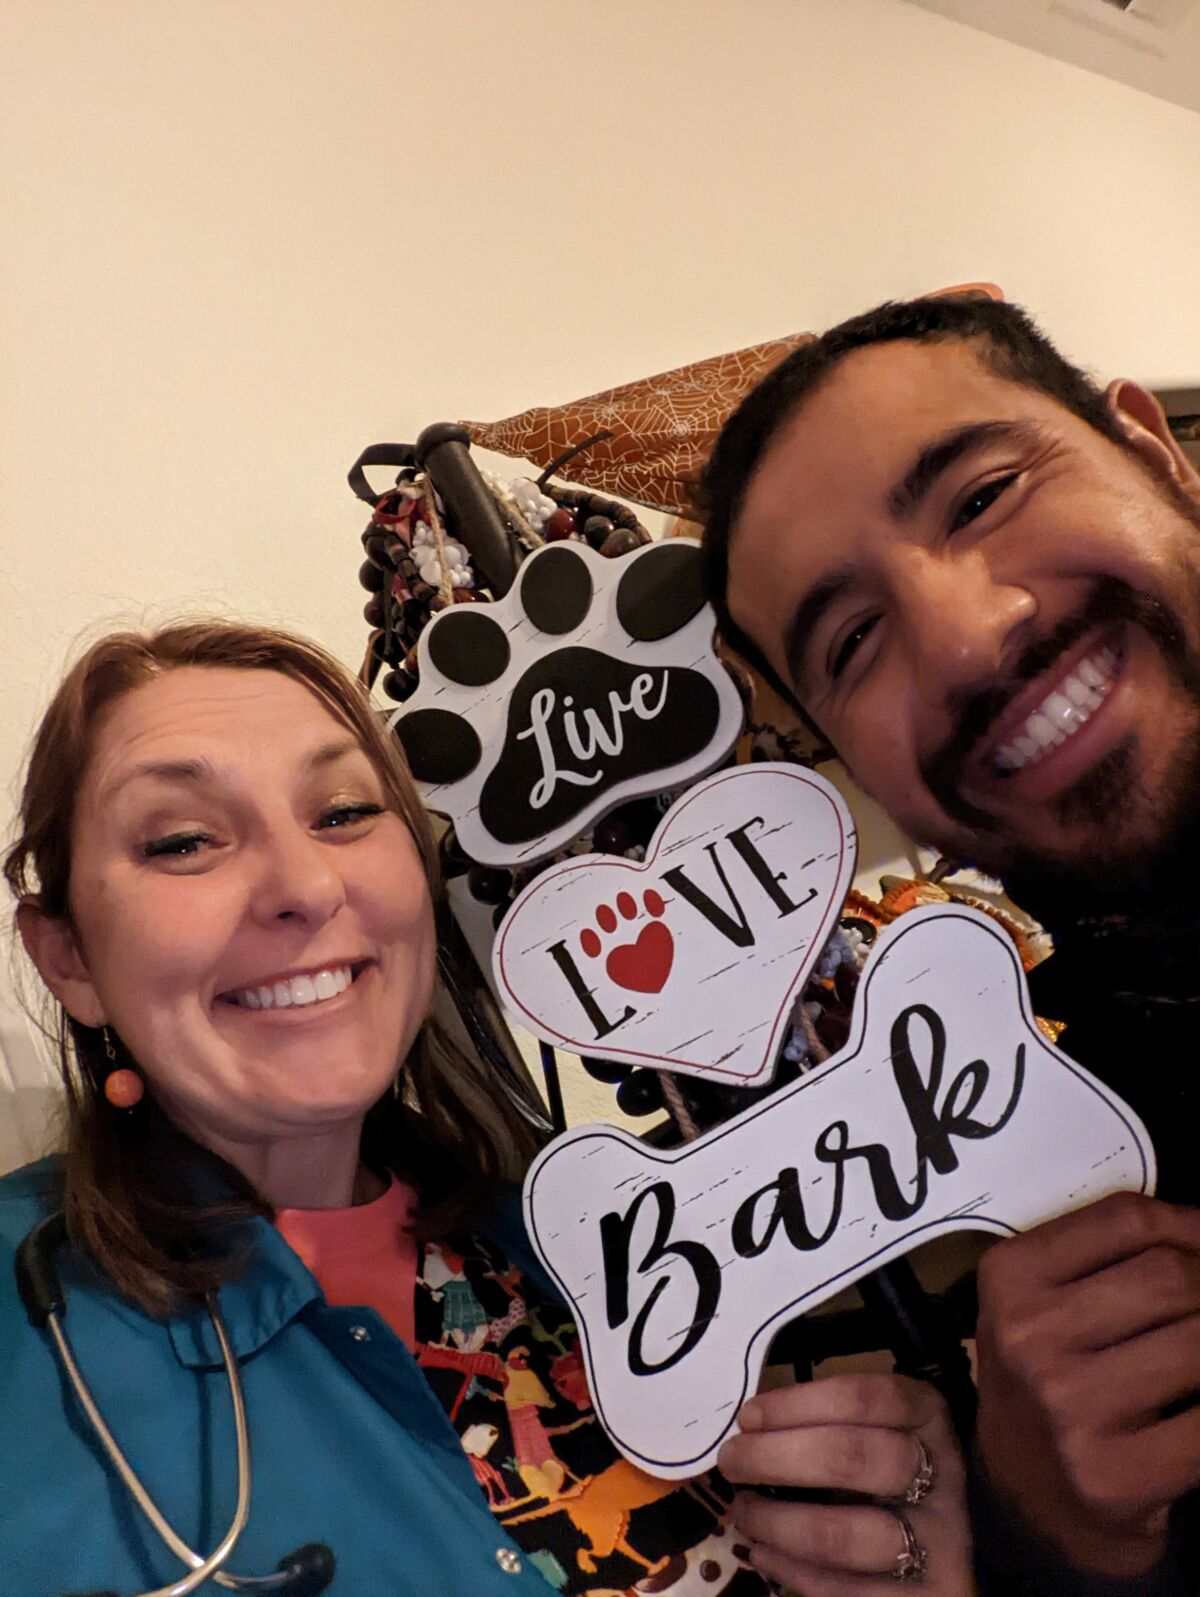 “Live, Love, Bark” is a reminder of life at a dog boarding kennel, according to Dr. Anne Serdy, with Edmundo Hernandez.